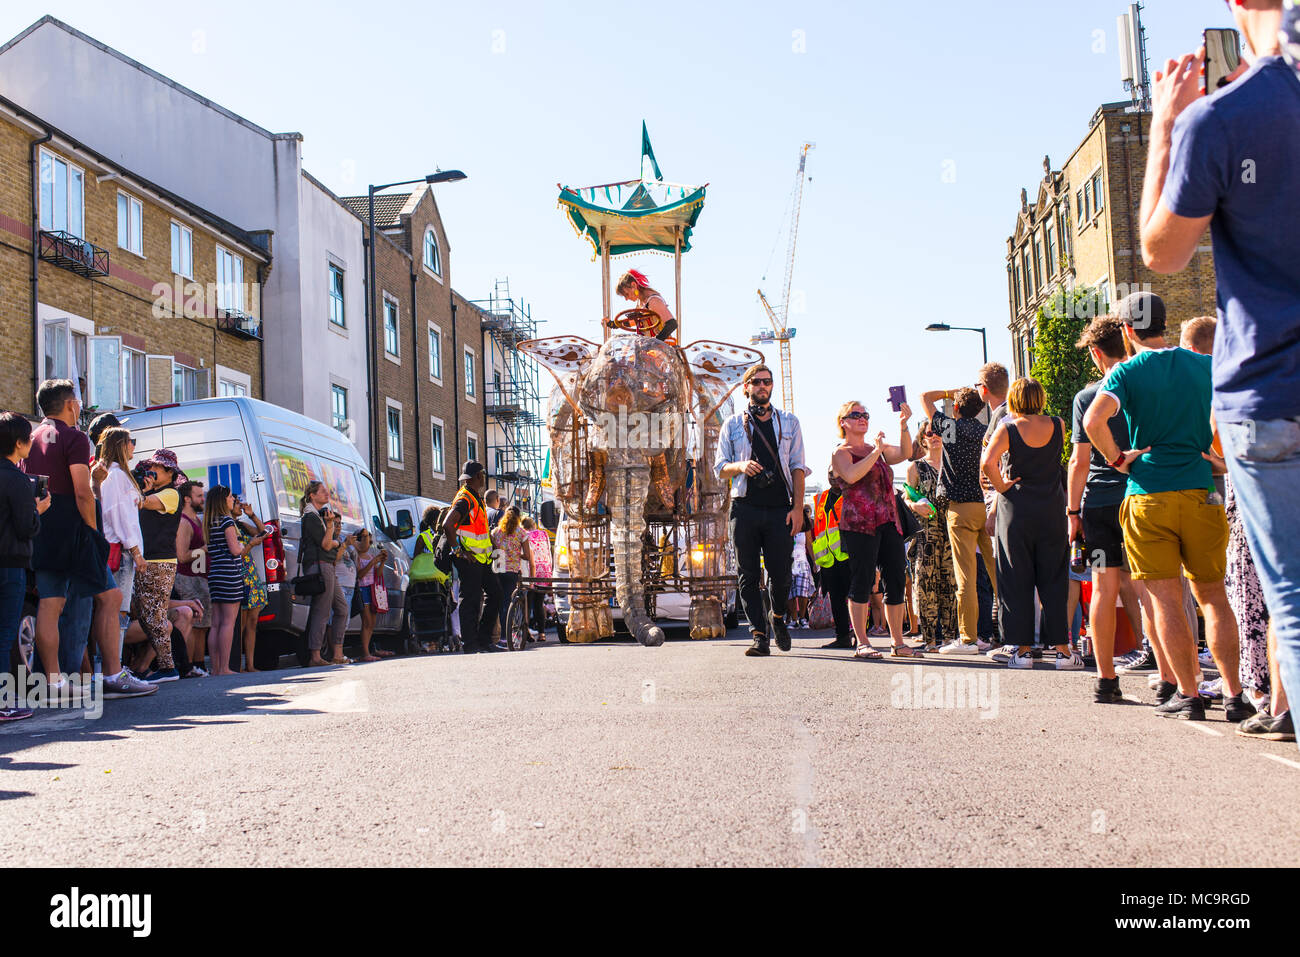 Hackney, London, UK. 11th September 2016. People watching the parade with a big elephant float approaching during the Hackney Carnival 2016 in Ridley  Stock Photo